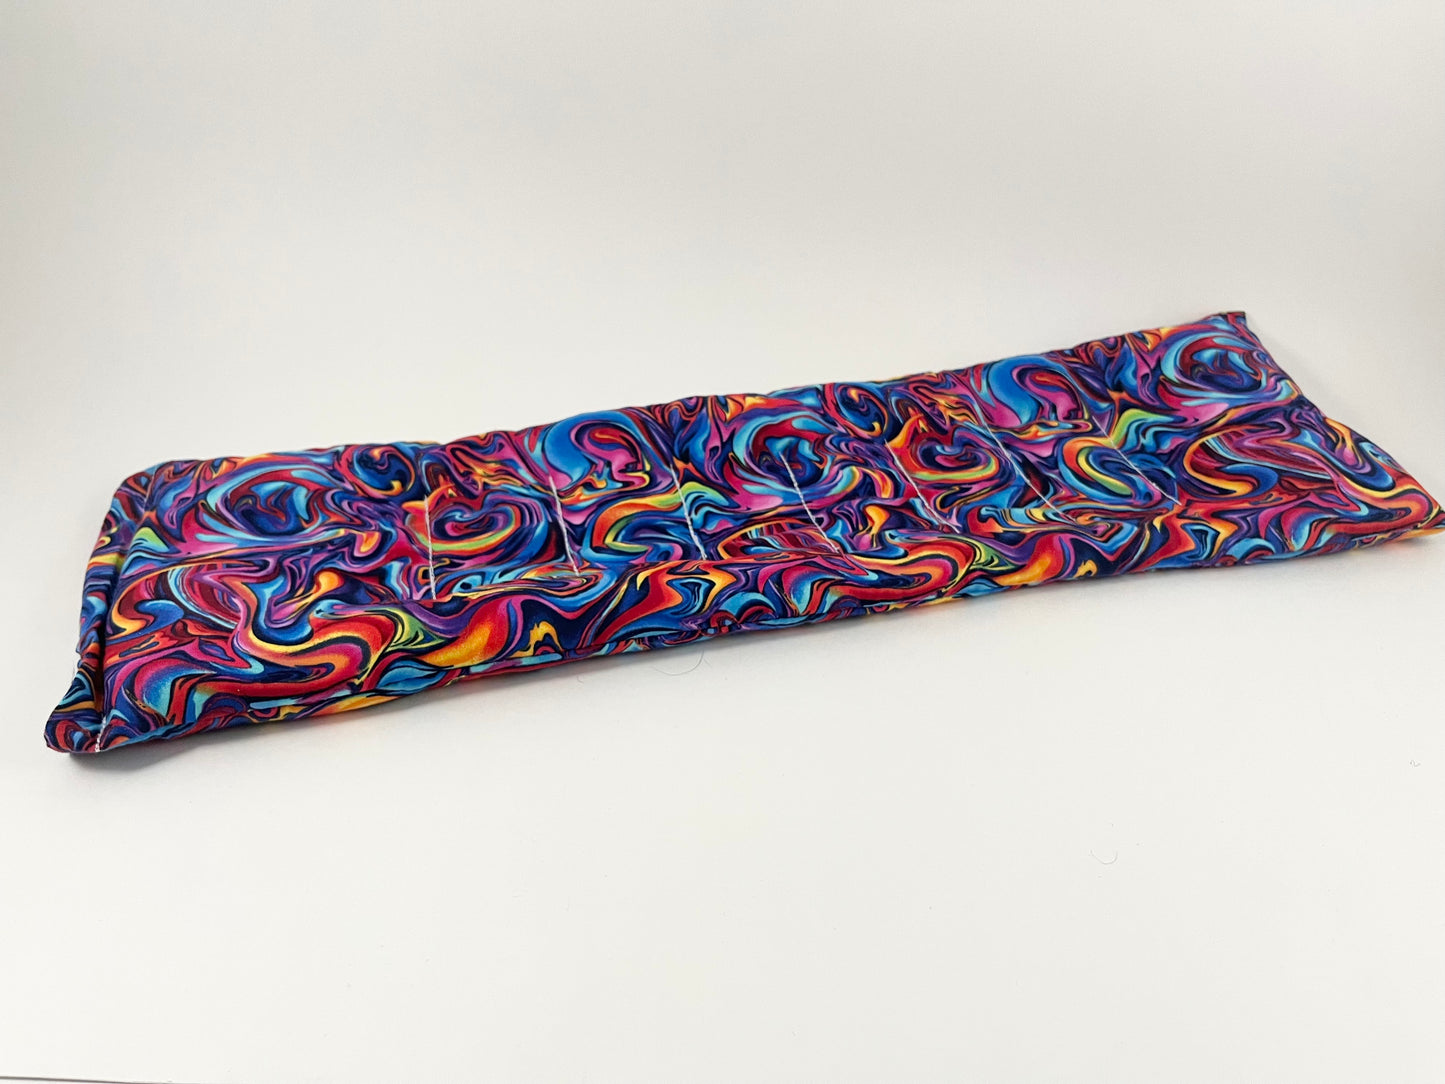 Rich Rainbow Psychedelic Giant Neck Wrap